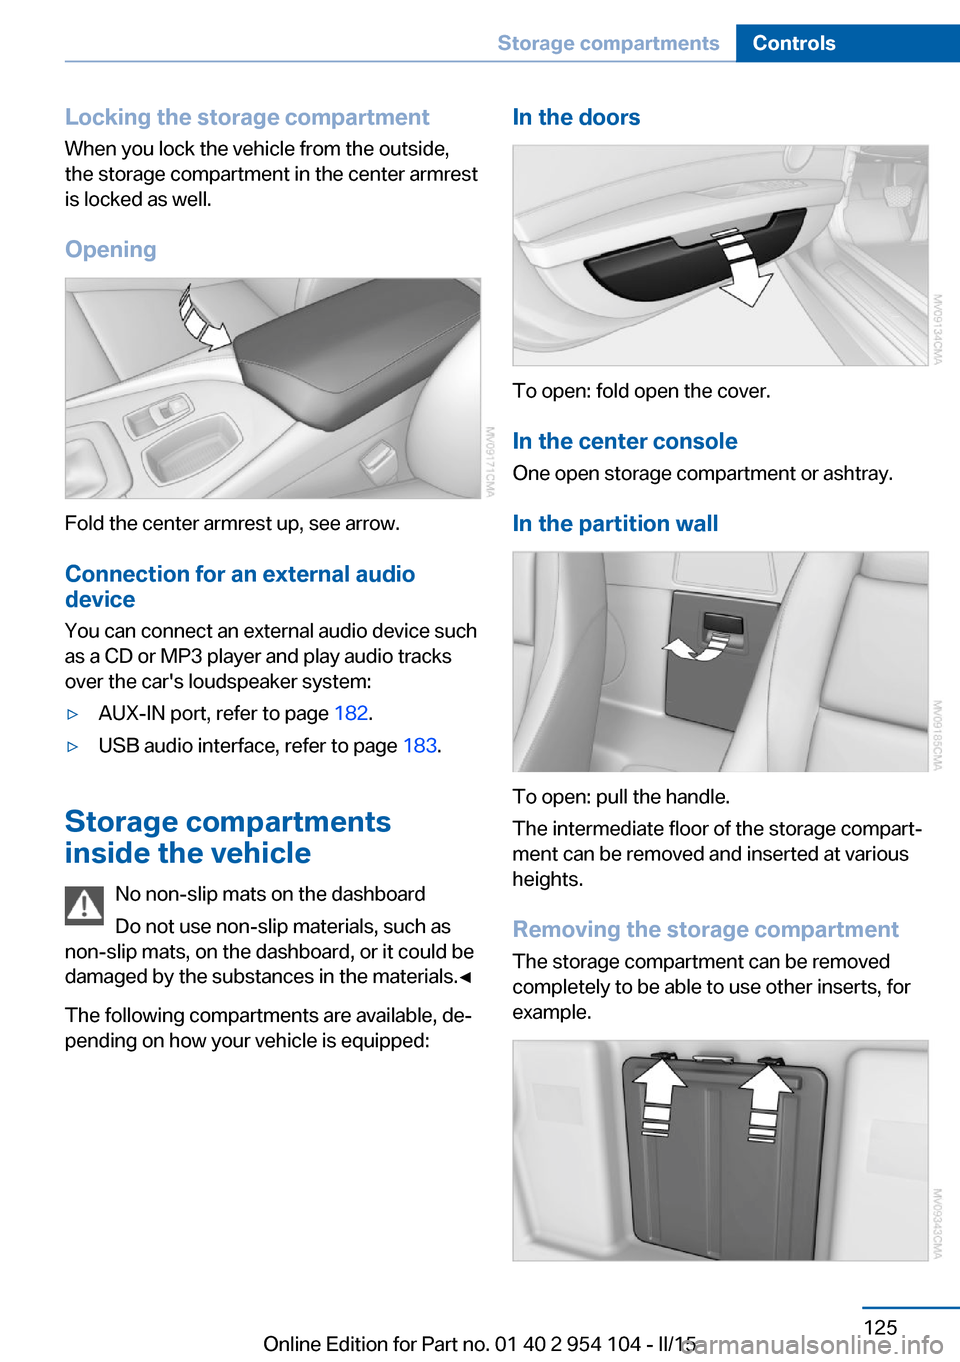 BMW Z4 2015 E89 Owners Manual Locking the storage compartment
When you lock the vehicle from the outside,
the storage compartment in the center armrest
is locked as well.
Opening
Fold the center armrest up, see arrow.Connection fo